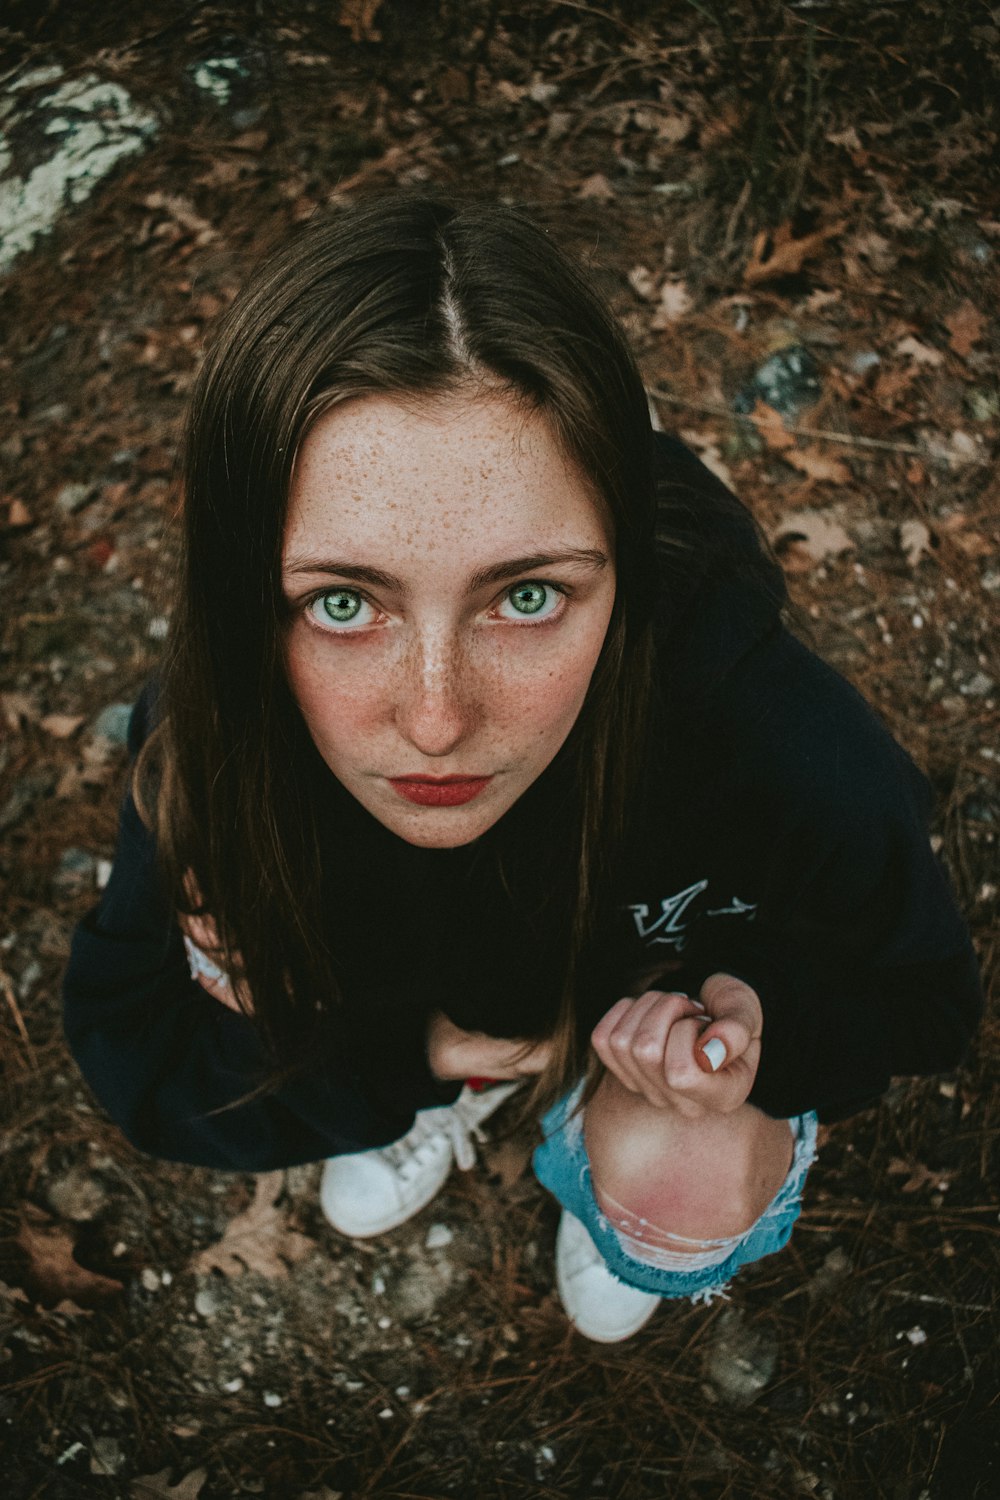 a woman with freckled hair and blue eyes sitting on the ground